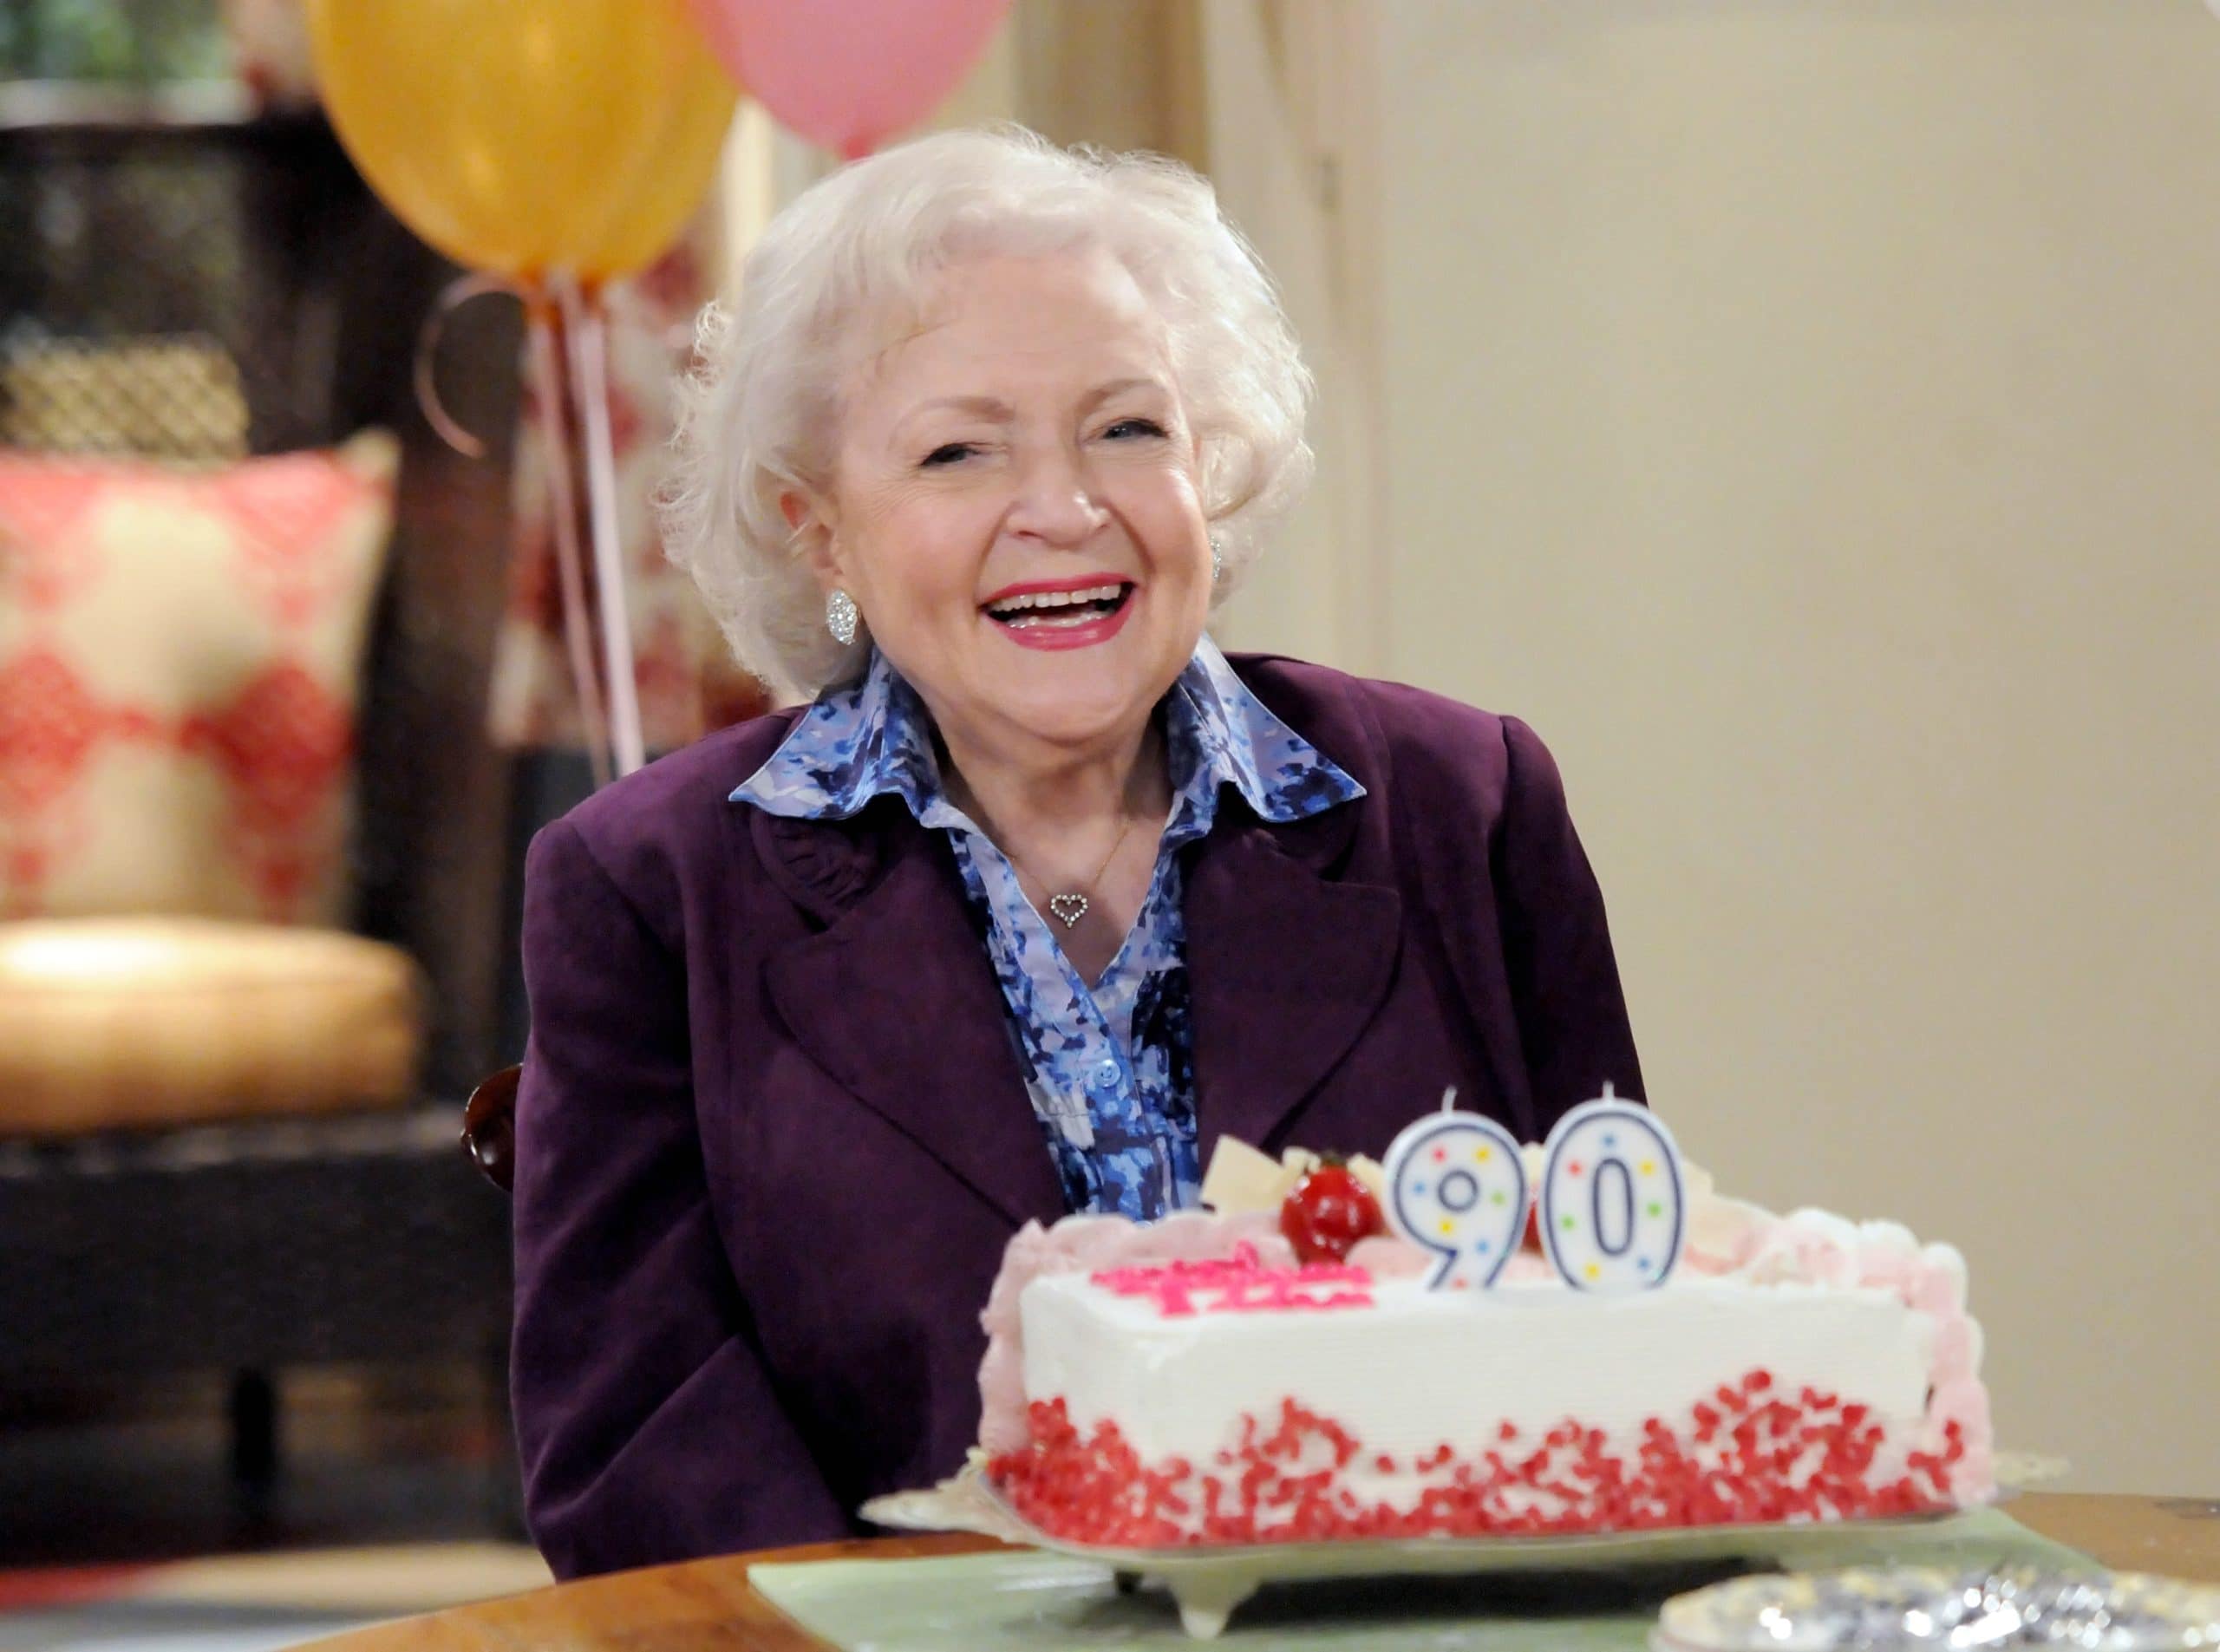 HOT IN CLEVELAND, Betty White